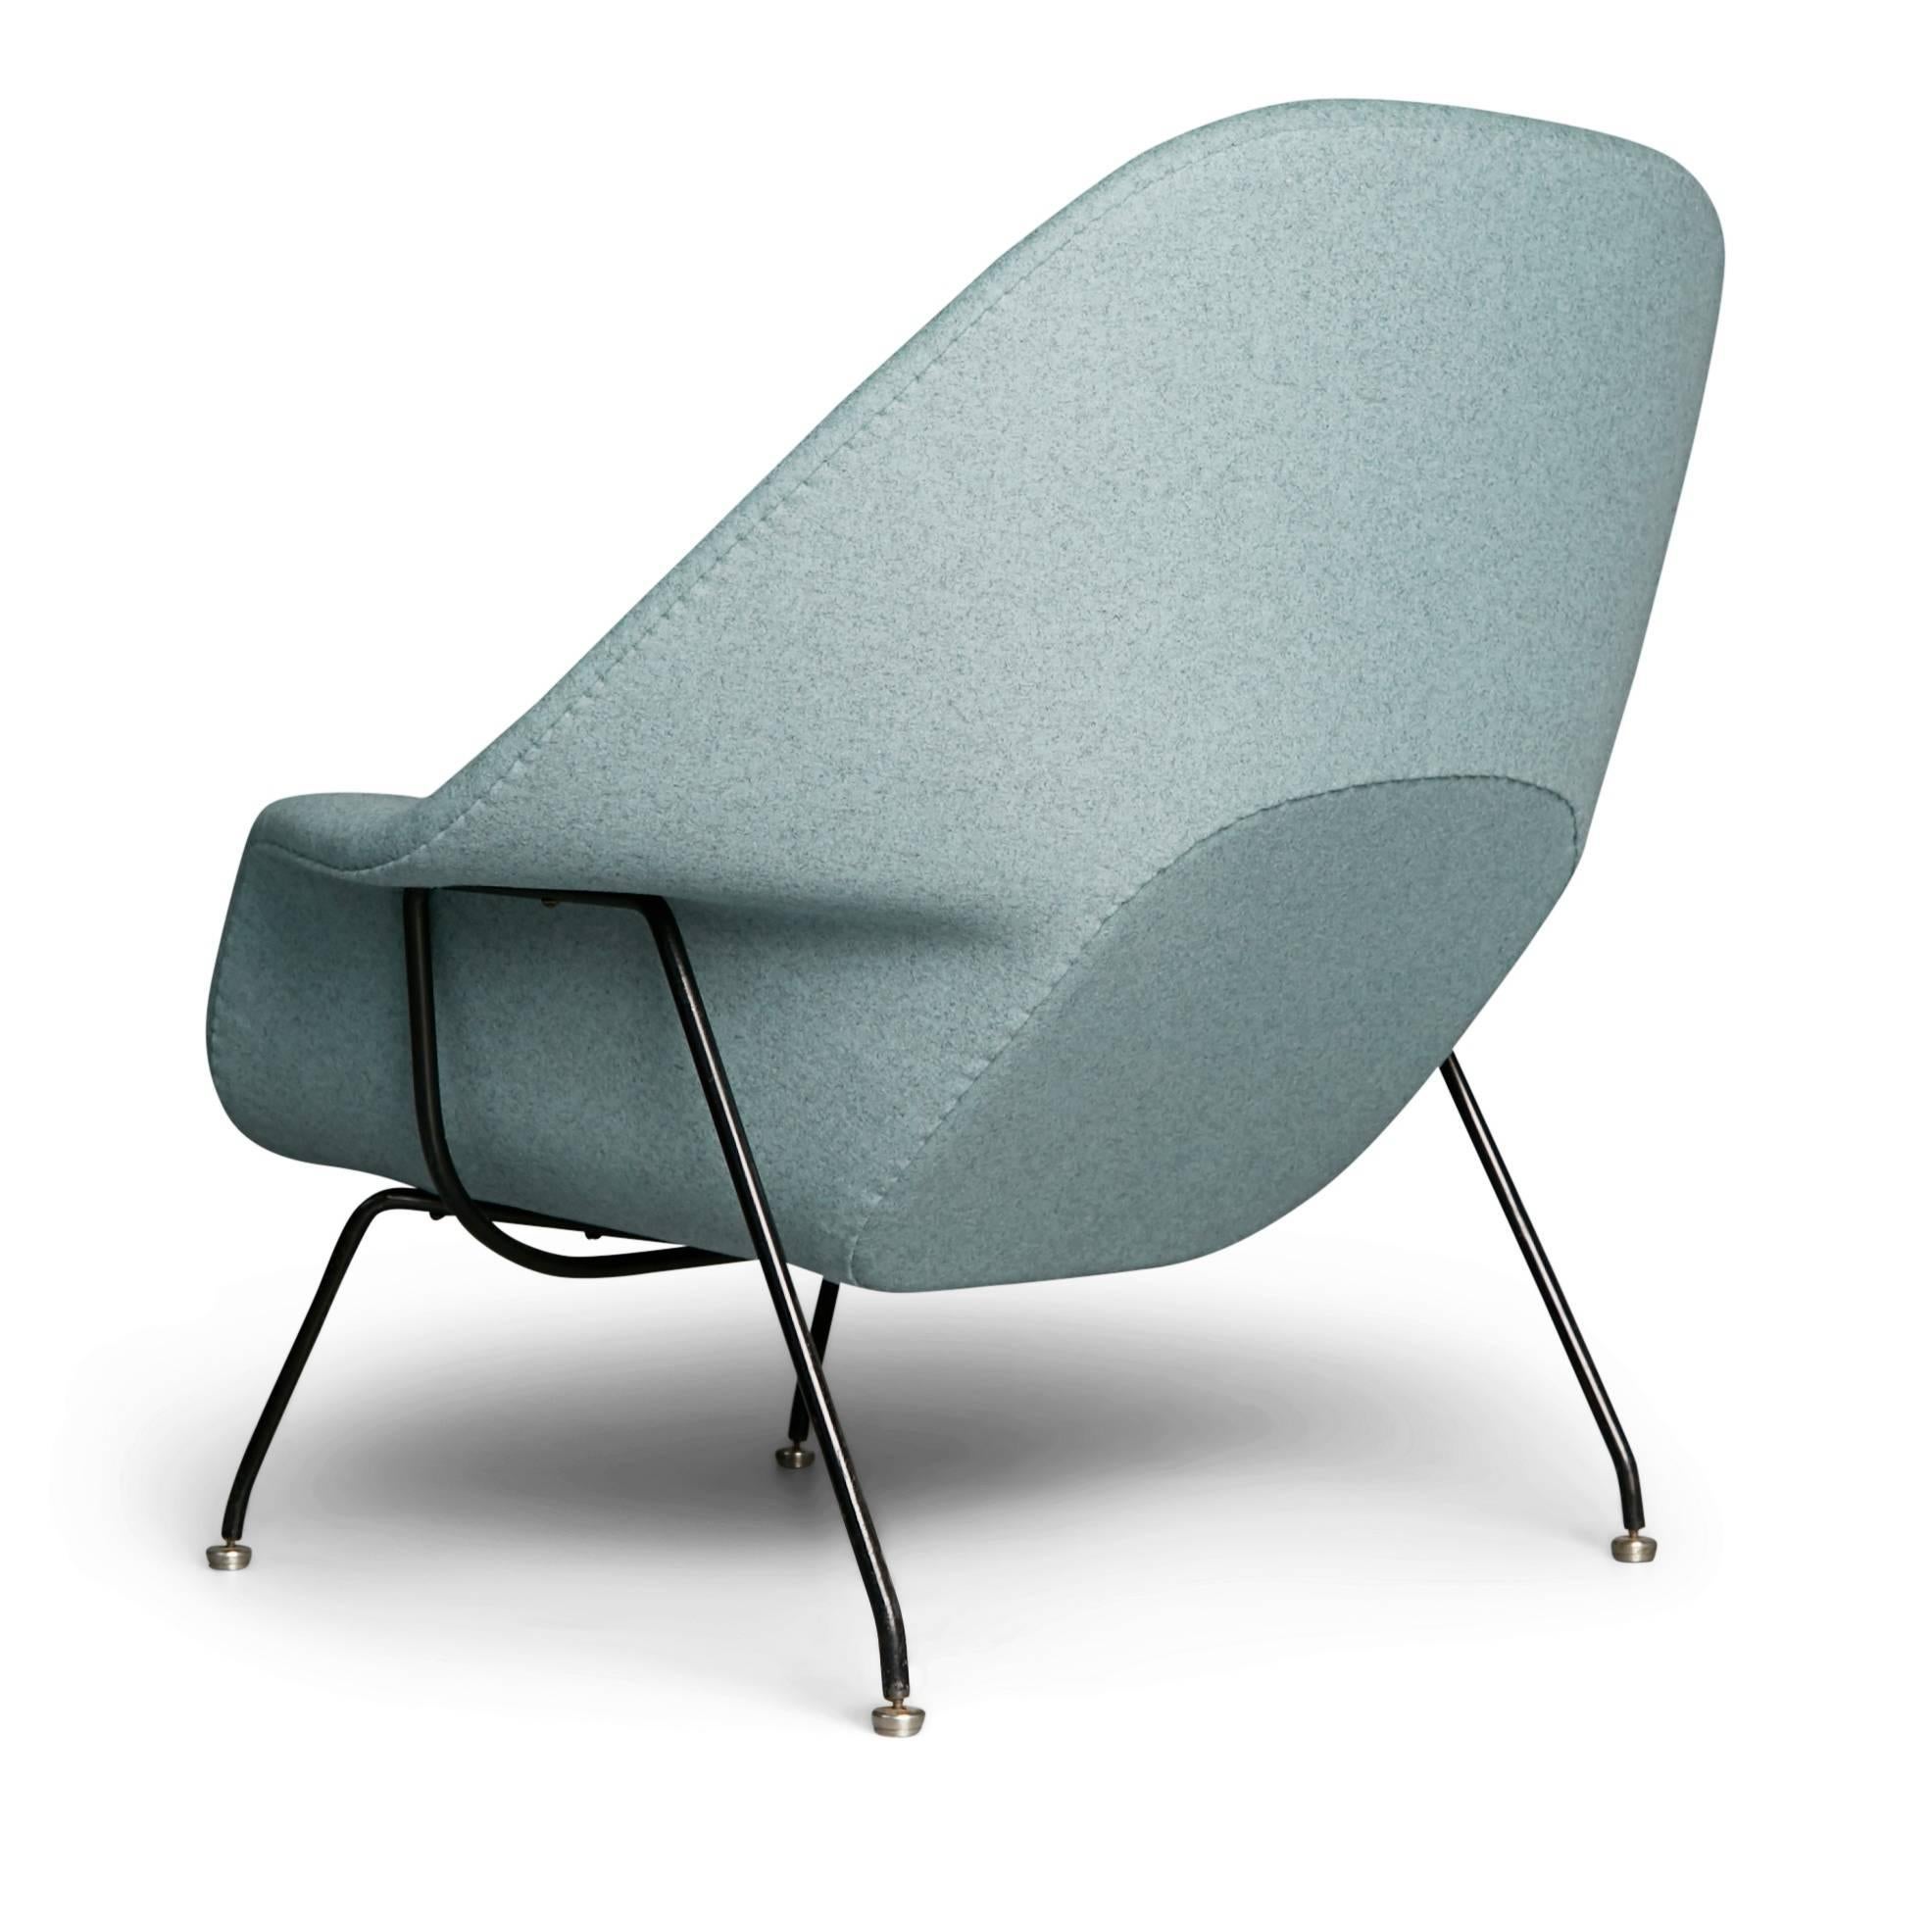 American Newly Upholstered Womb Chair by Eero Saarinen for Knoll, circa 1950